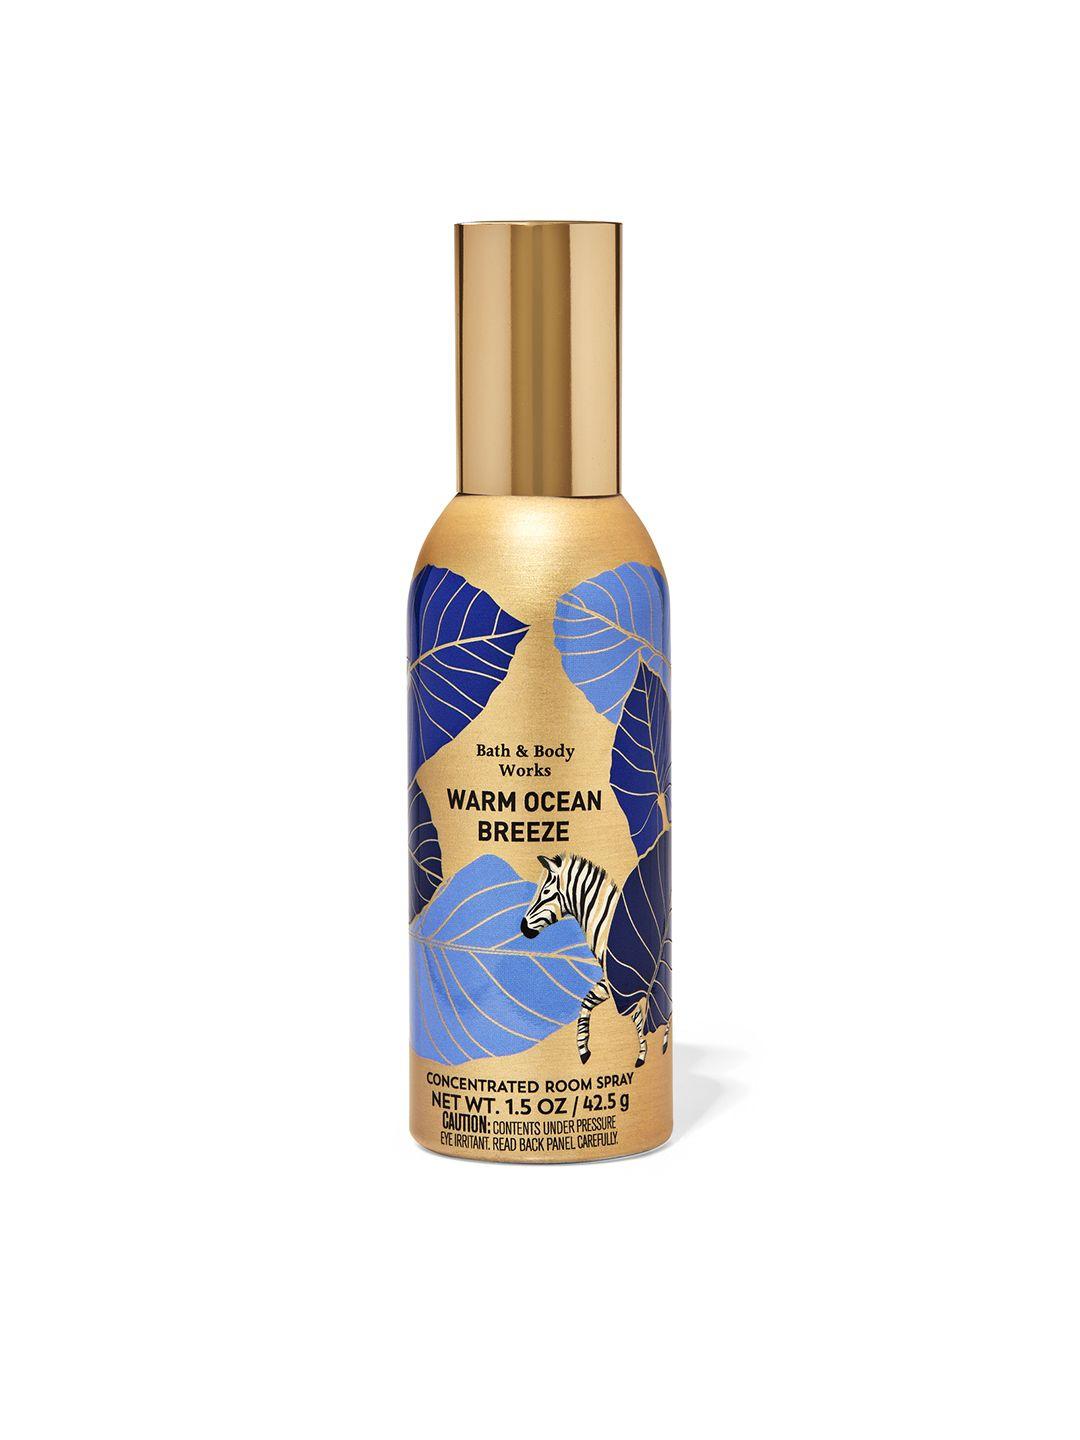 bath & body works warm ocean breeze concentrated room spray - 42.5 g